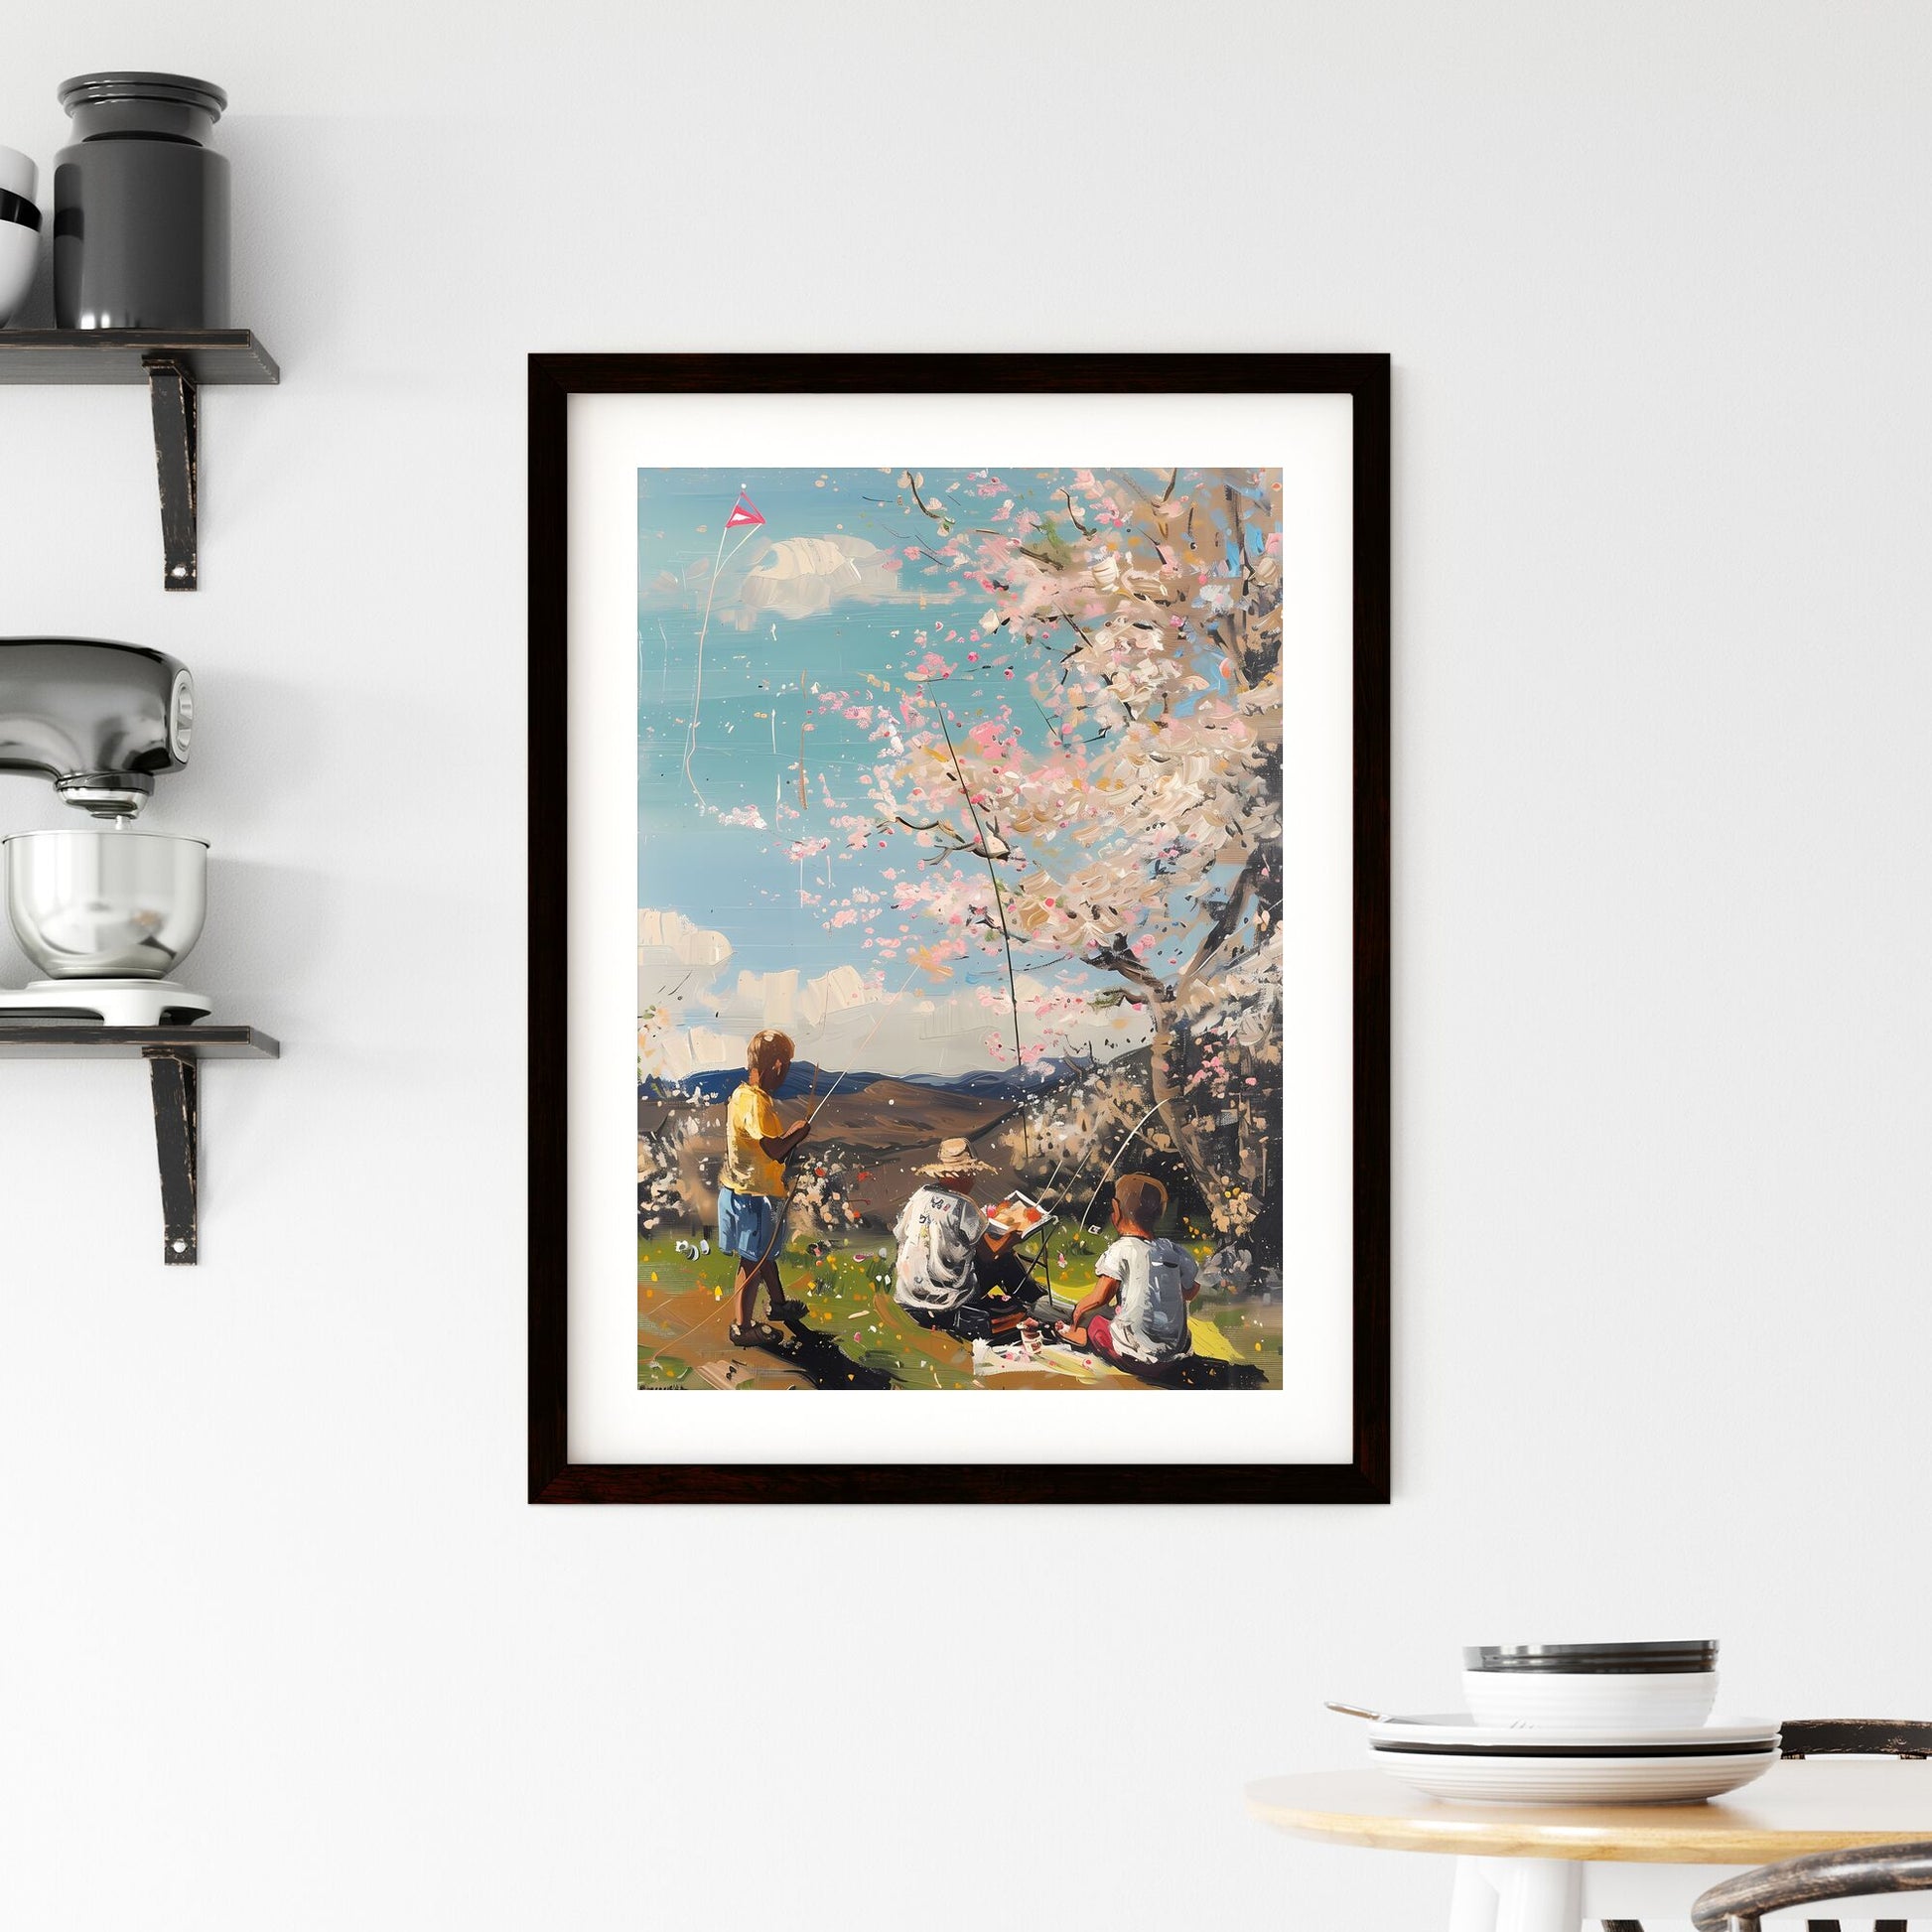 Vibrant Oil Painting: Springtime Picnic under Blossoming Cherry Tree with Kite Flying Children and Group Gathering Default Title